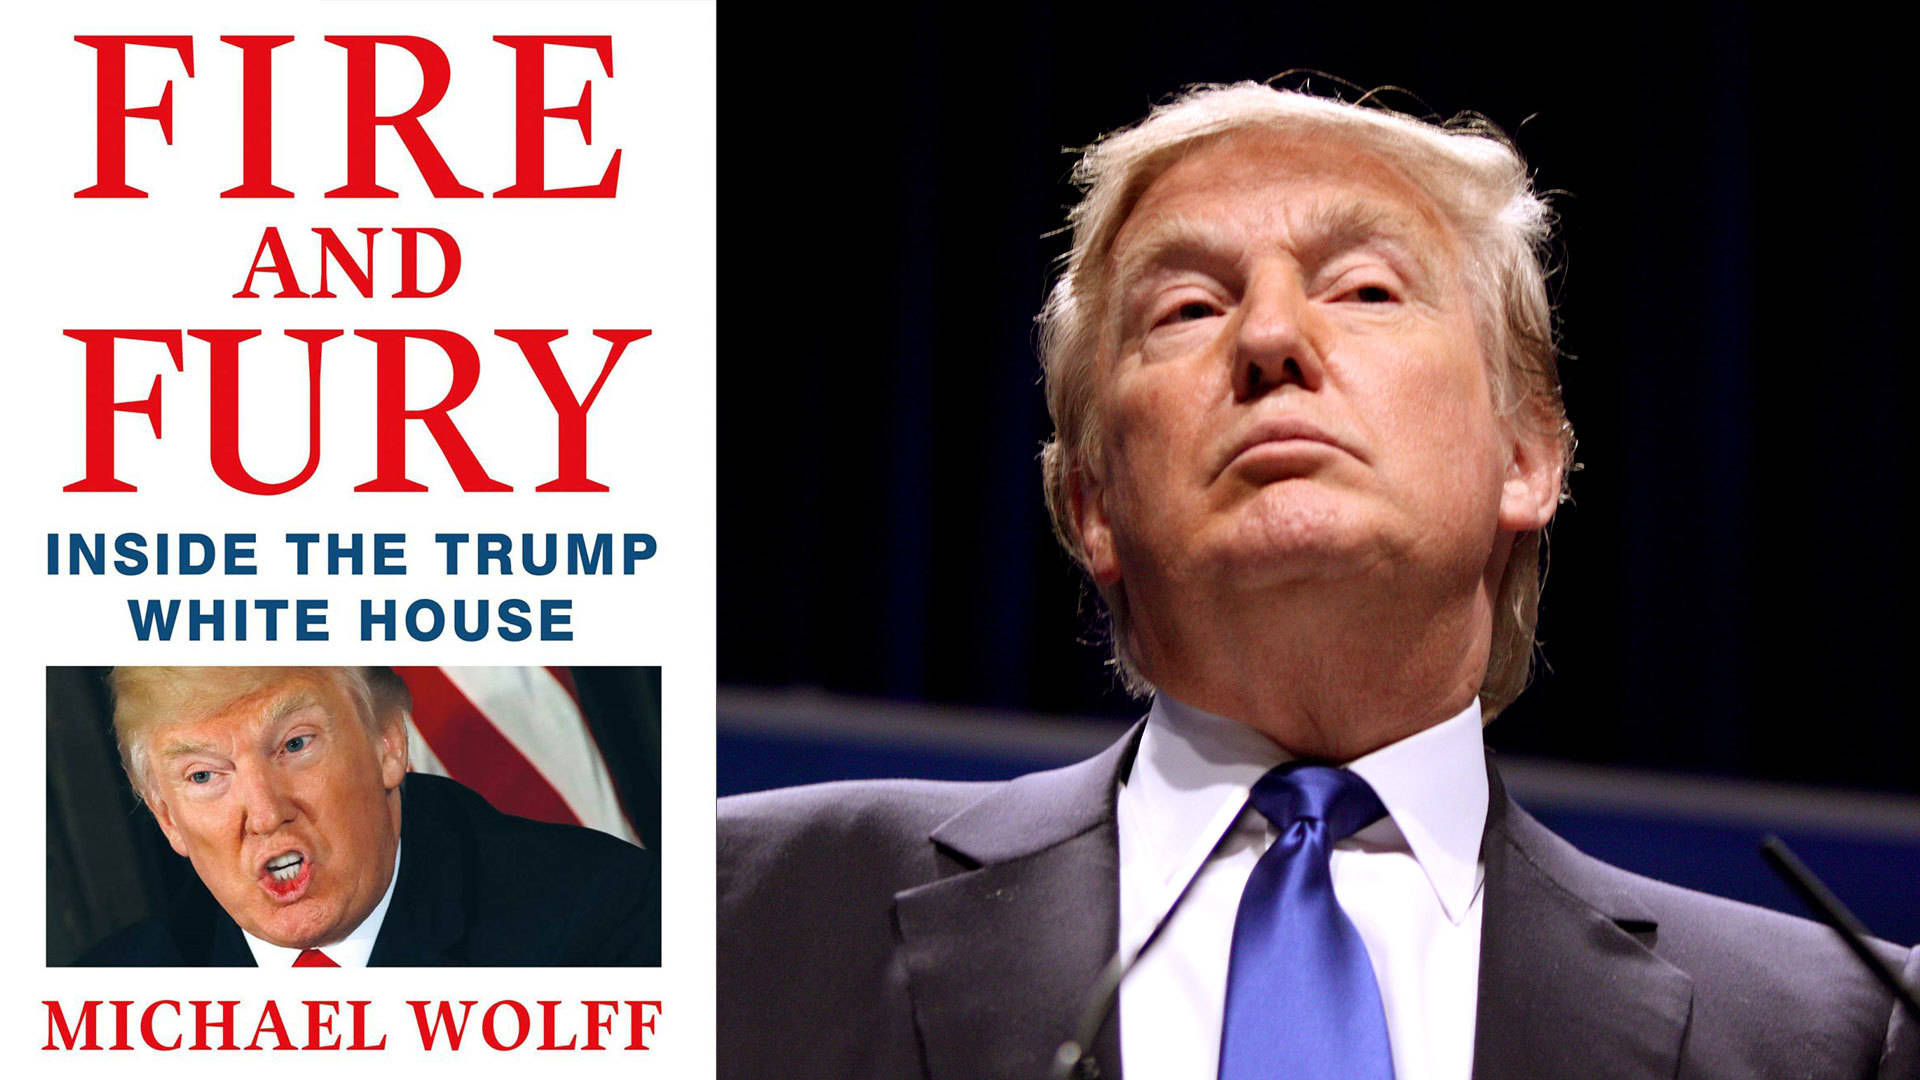 Total loser, caustic anti-Trump book author Wolff degraded by President Trump